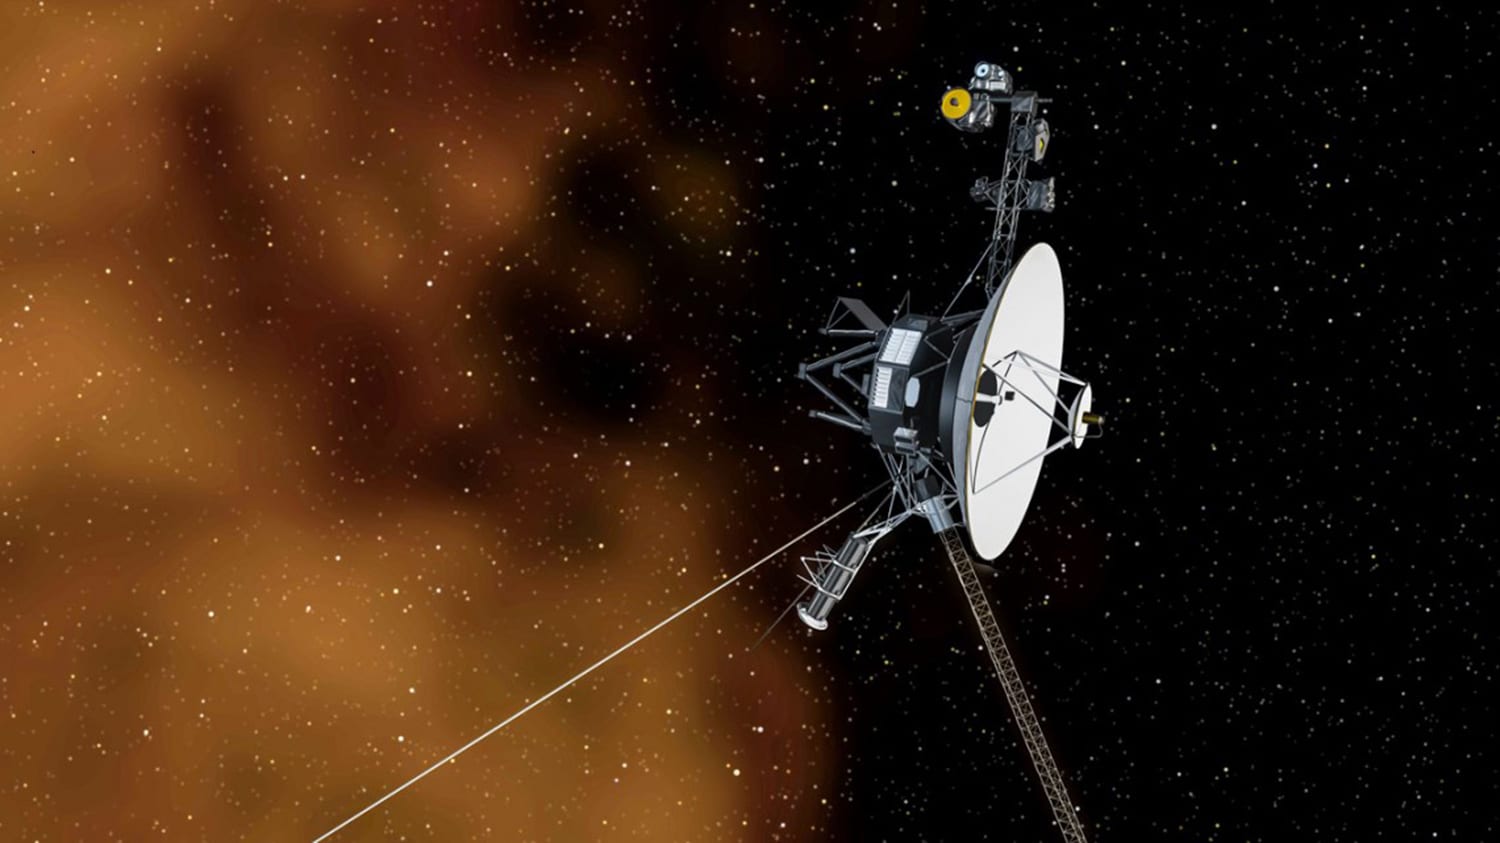 voyager detects 500 objects